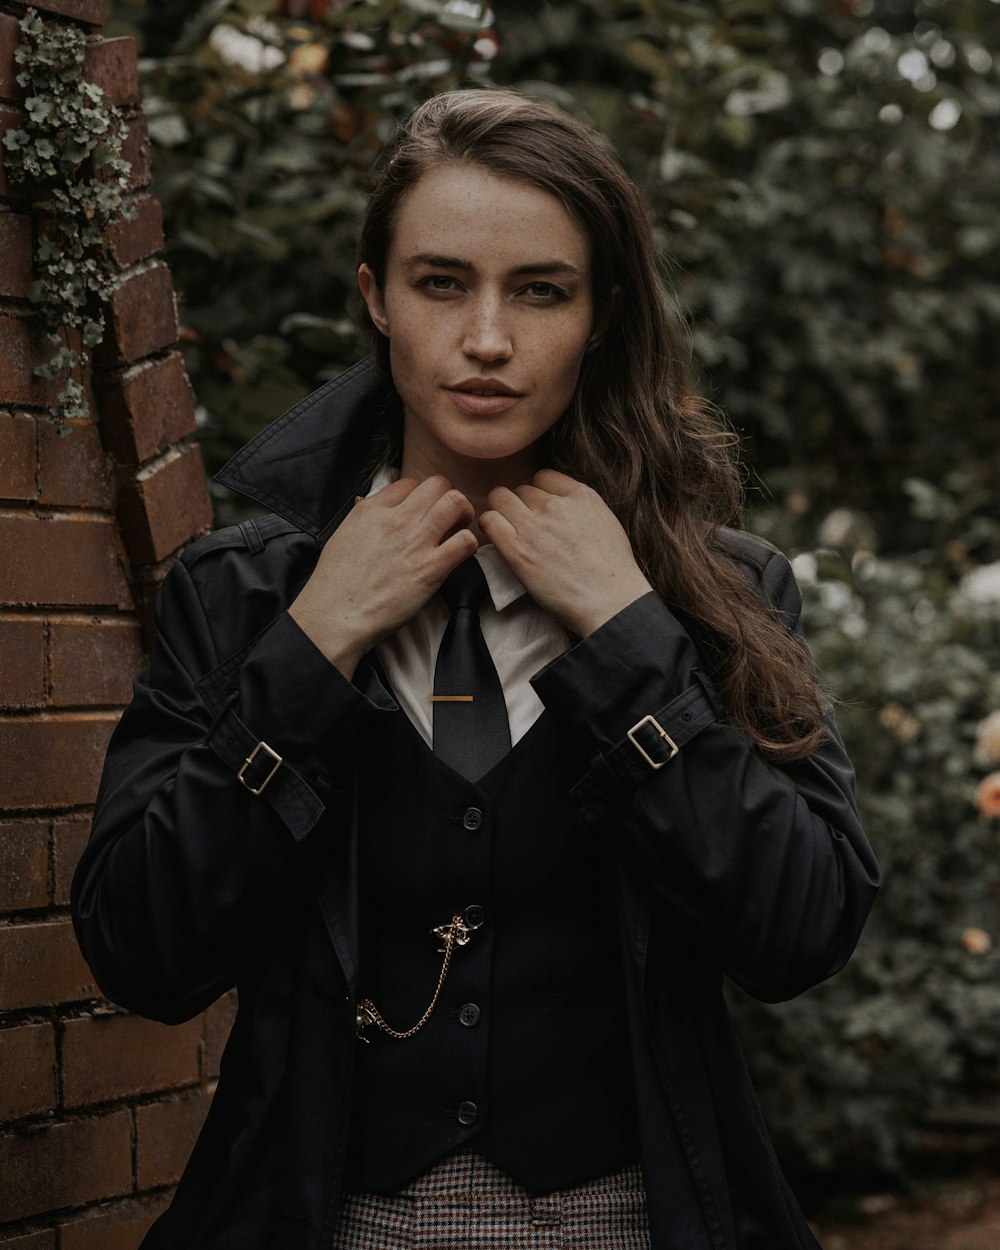 a woman wearing a suit and tie standing next to a brick wall